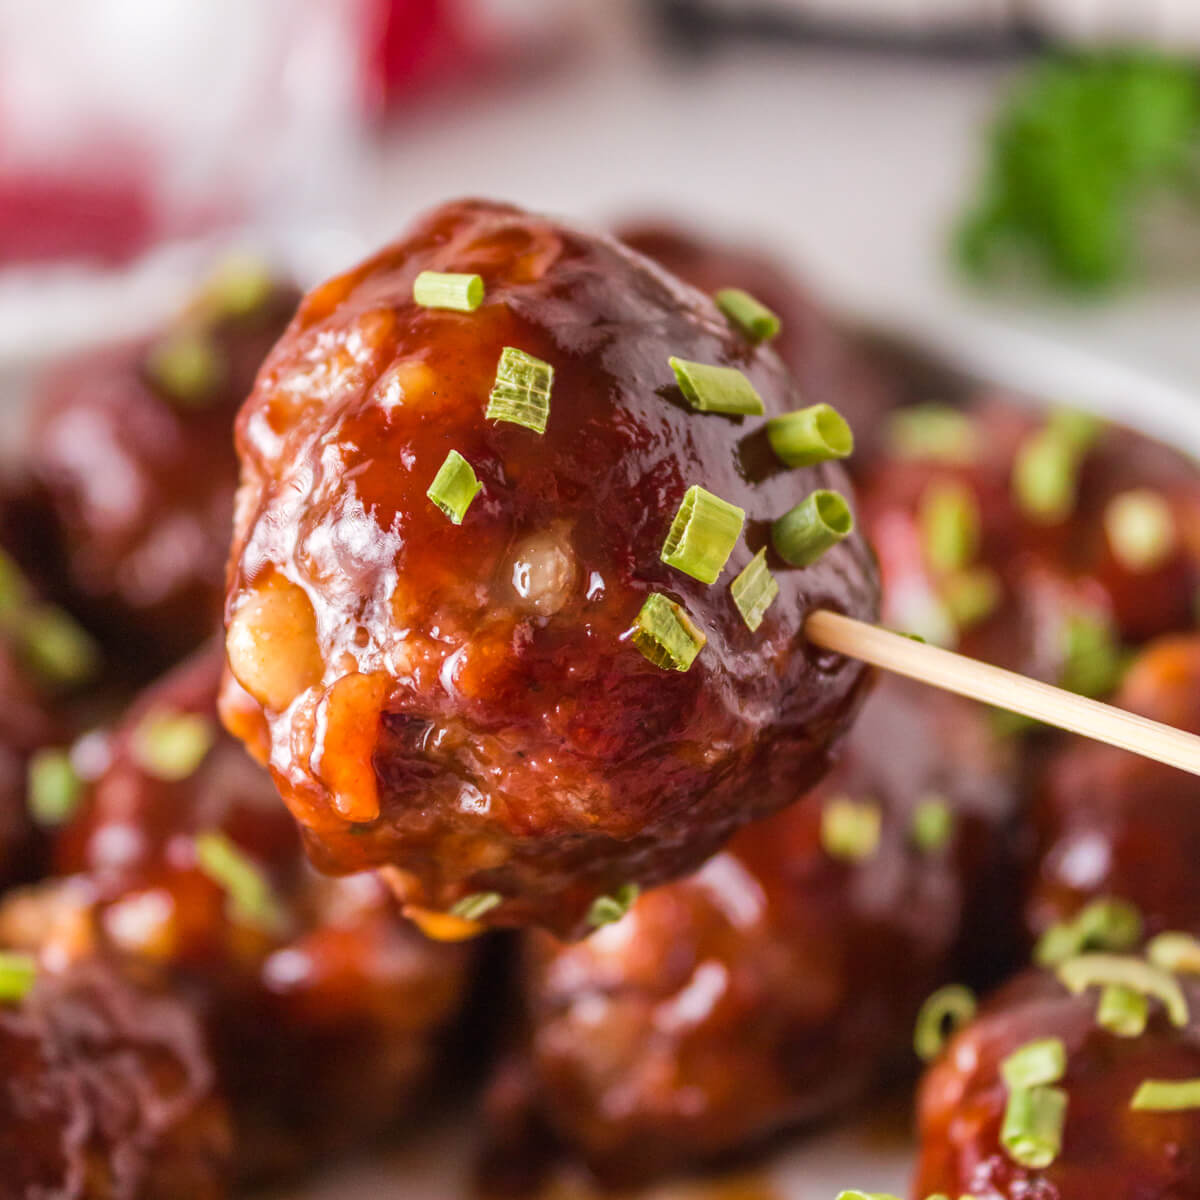 A smoked meatball garnished with chopped green chives on a toothpick.